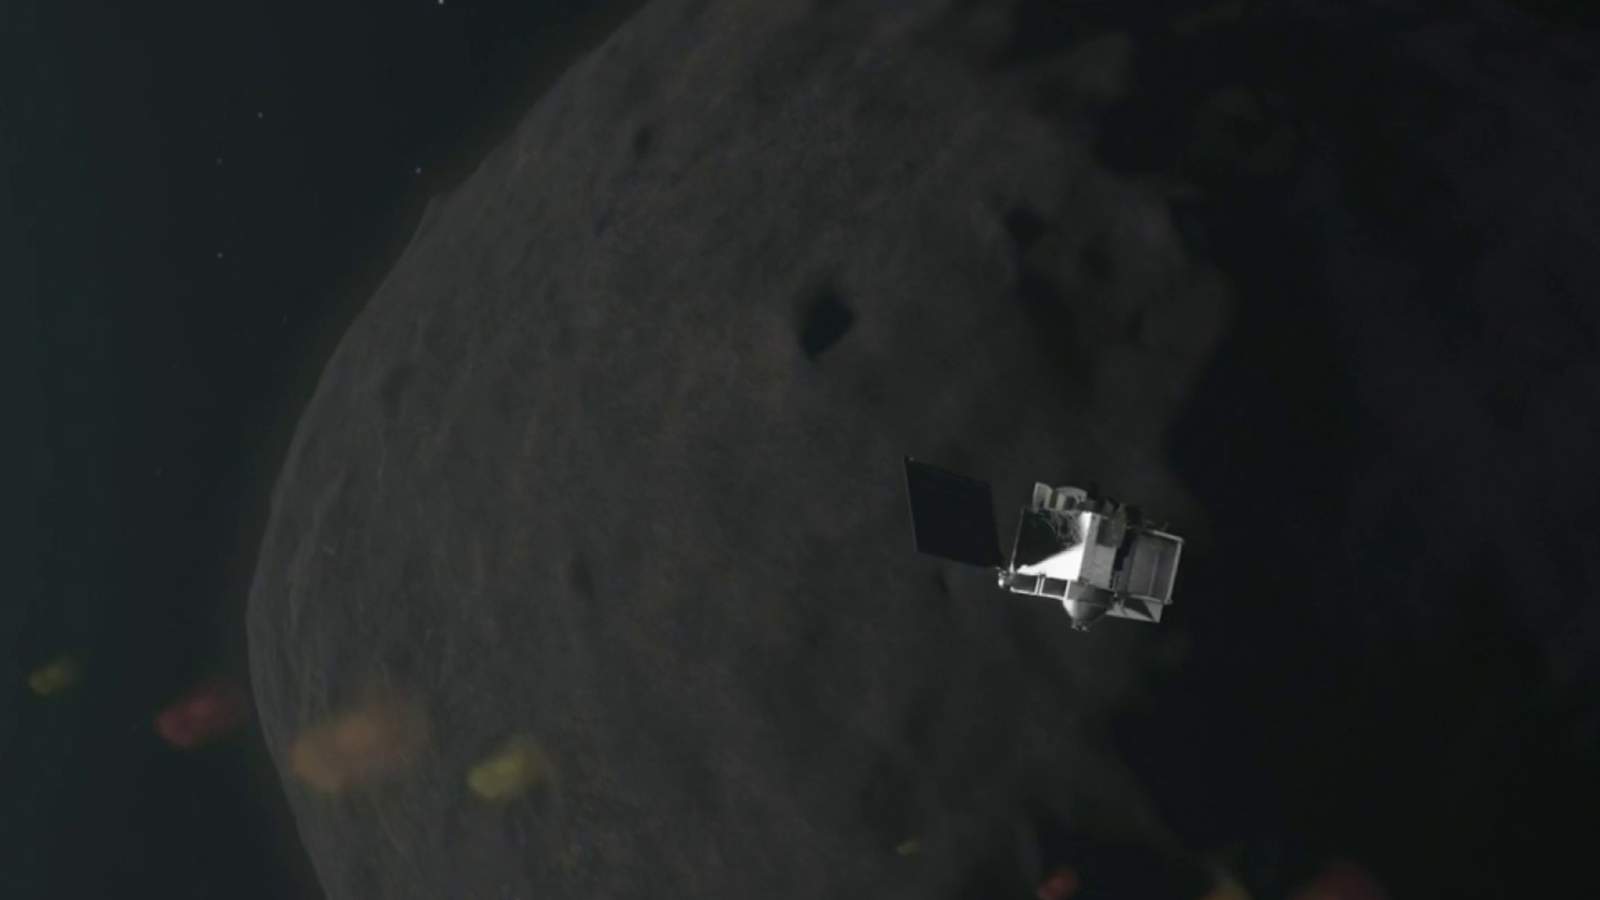 NASA touches an asteroid: What to know about OSIRIS-REx mission